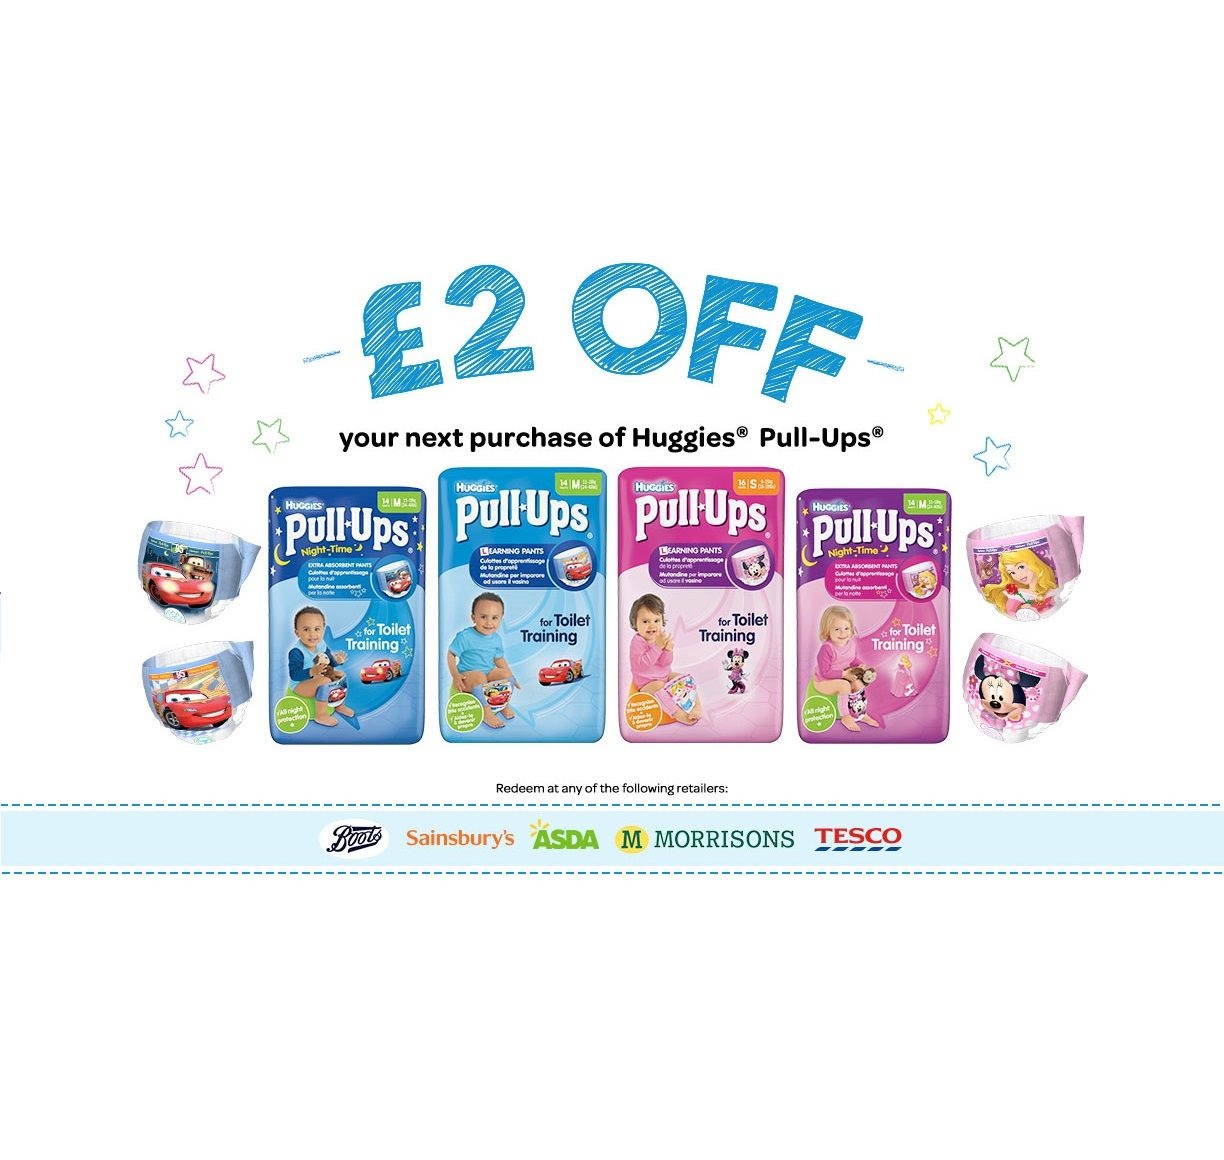 Voucher Code £2 Off Huggies Pull Ups | Freebies Of The Day Uk - Free Printable Coupons For Huggies Pull Ups